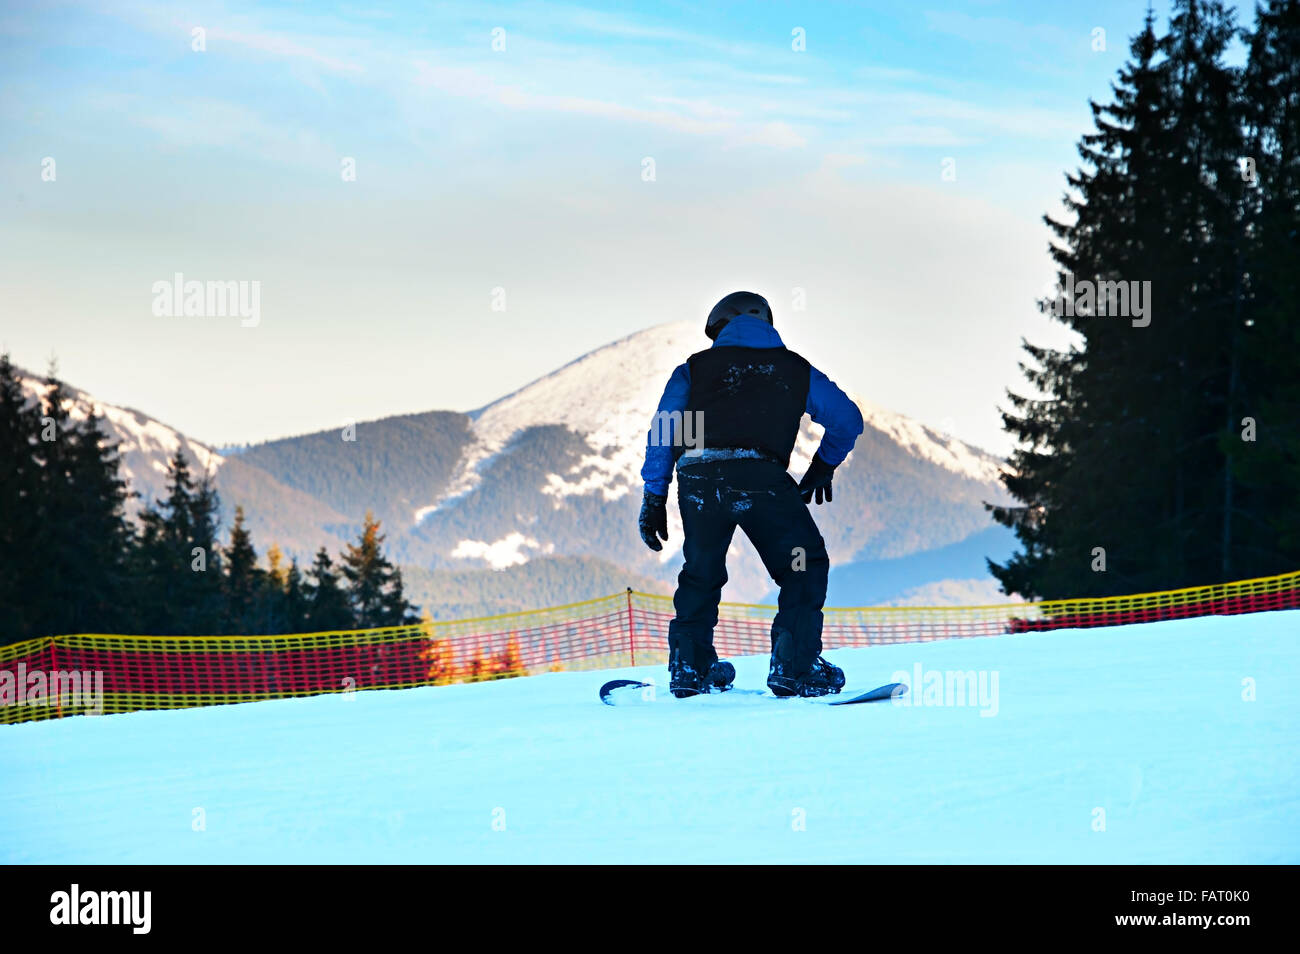 Unrecognizable snowboarder on a mountains slope at sunset in action Stock Photo